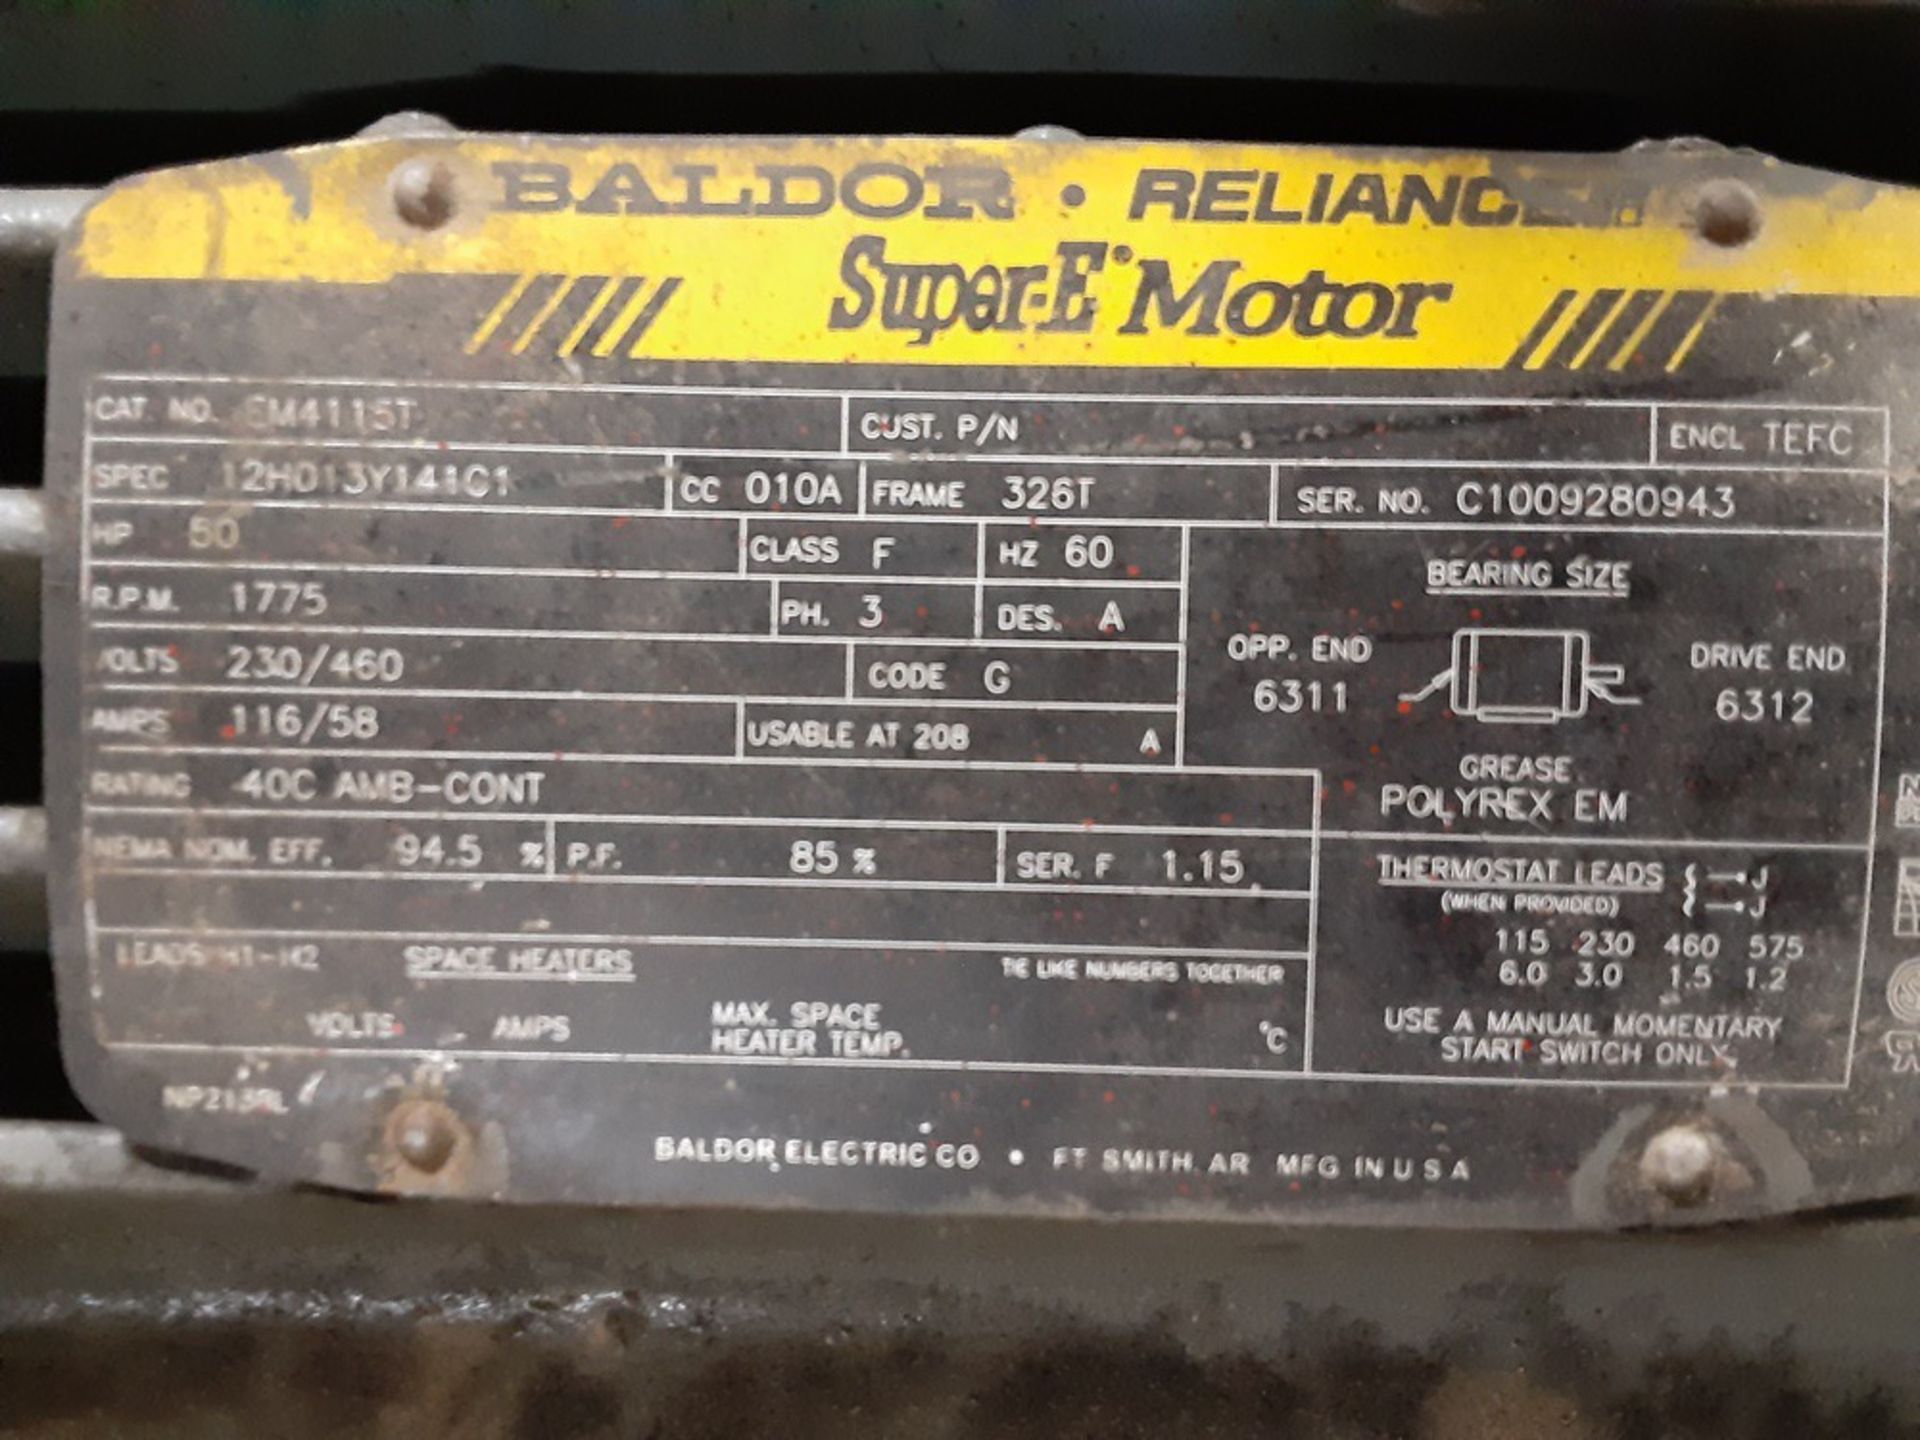 Baldor Electric Motor, 50 HP - Subject to Bulk Bid Lot 845B -The Greater of the Agg | Rig Fee: $40 - Image 2 of 2